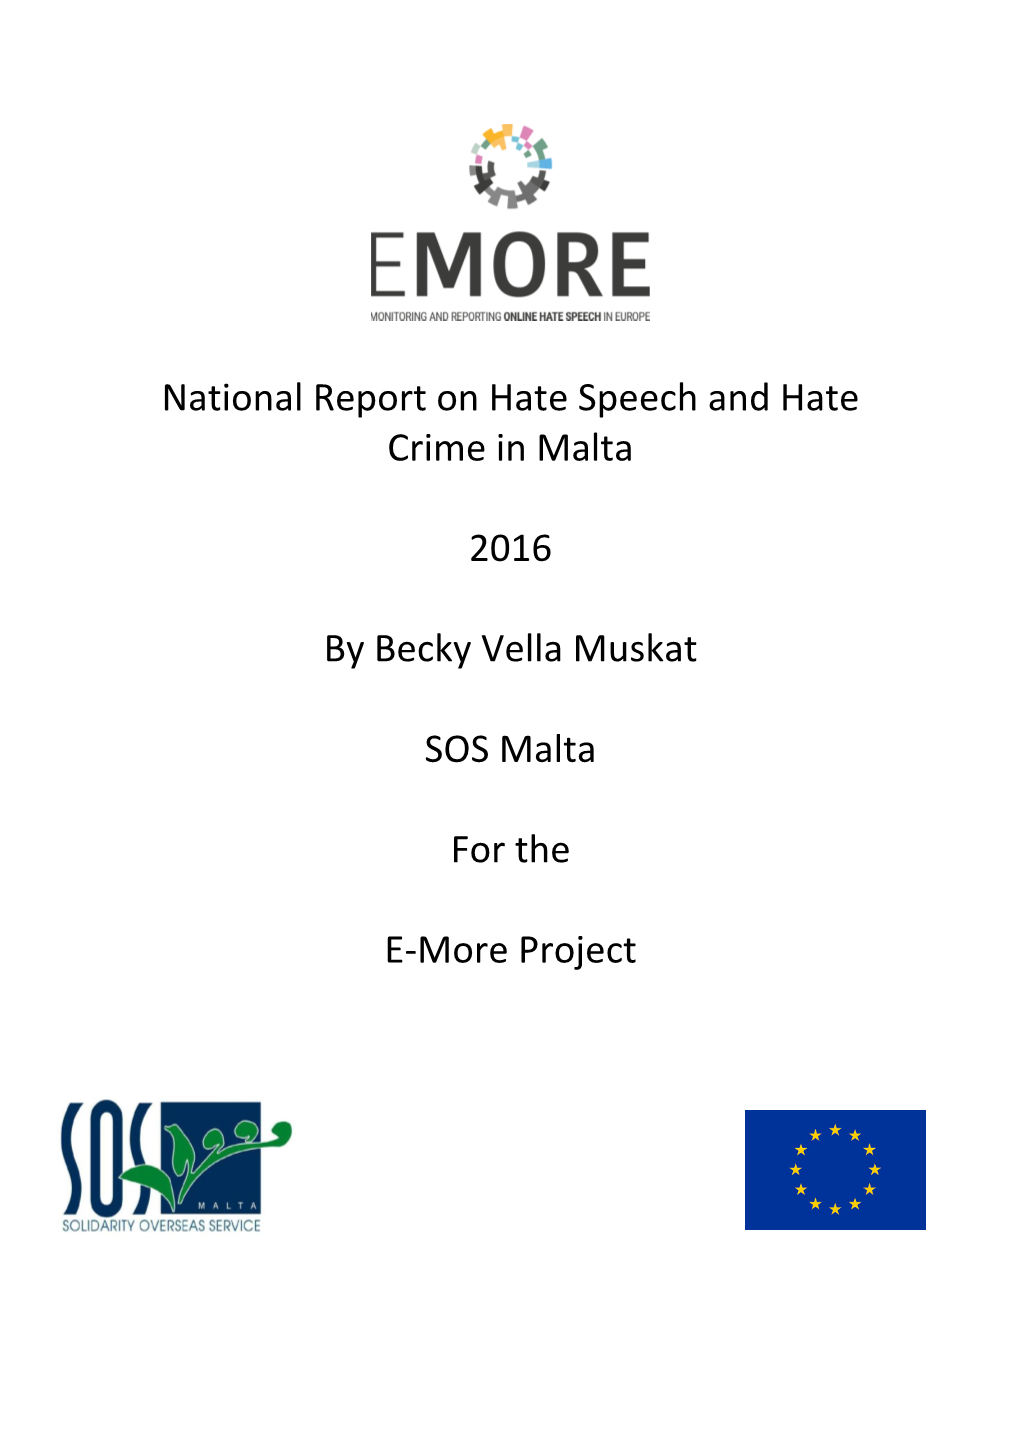 E-More- National Report on Hate Speech and Hate Crime in Malta